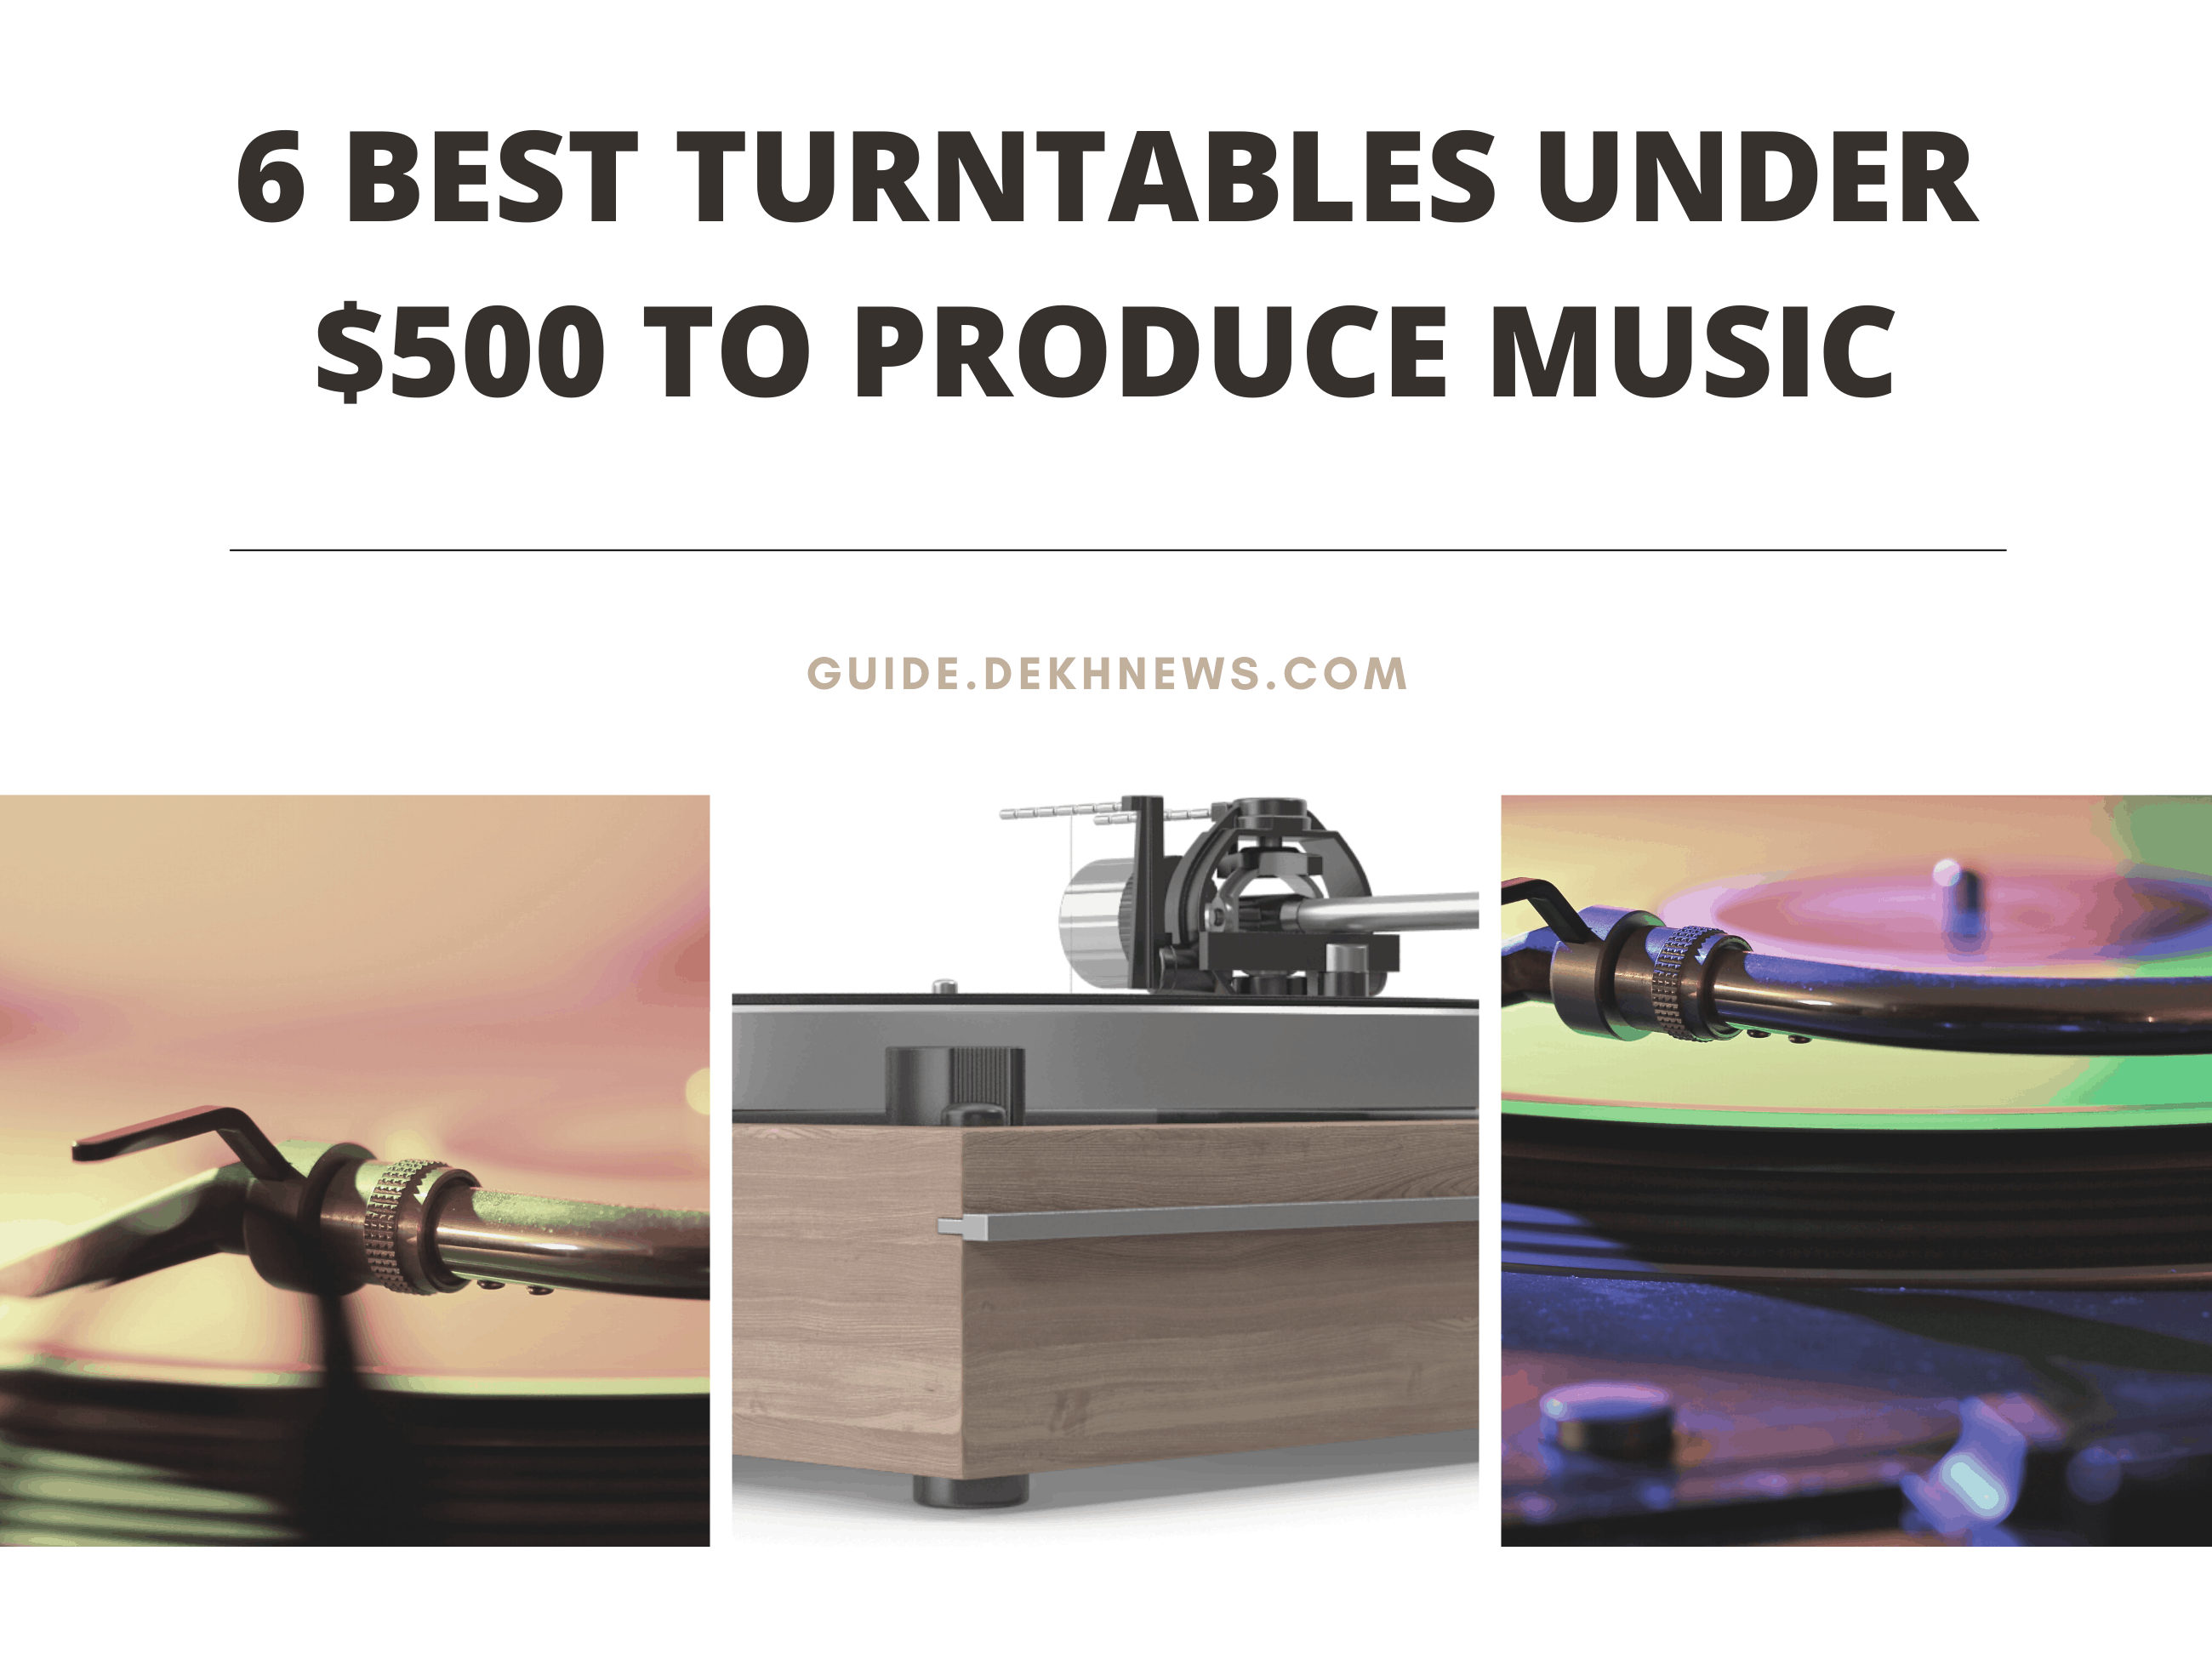 6 Best Turntables under $500 to Produce Music from Vinyl Records